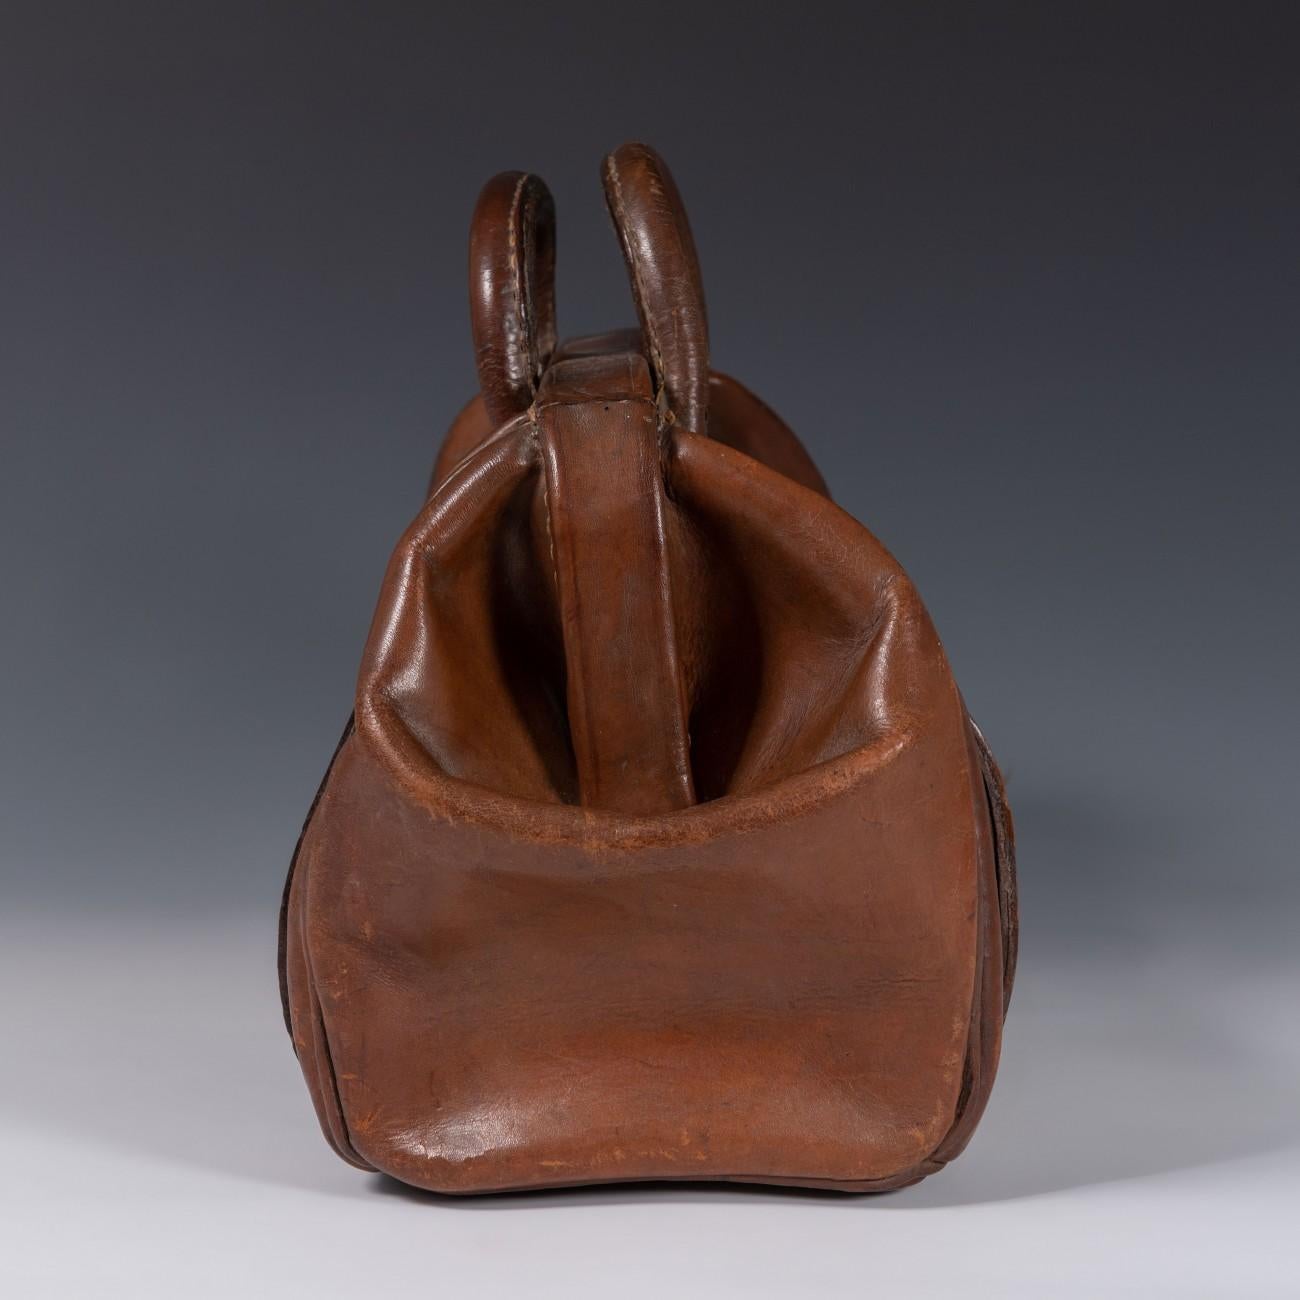 Early 20th Century Leather Tool, Cash or Brief Bag, circa 1920